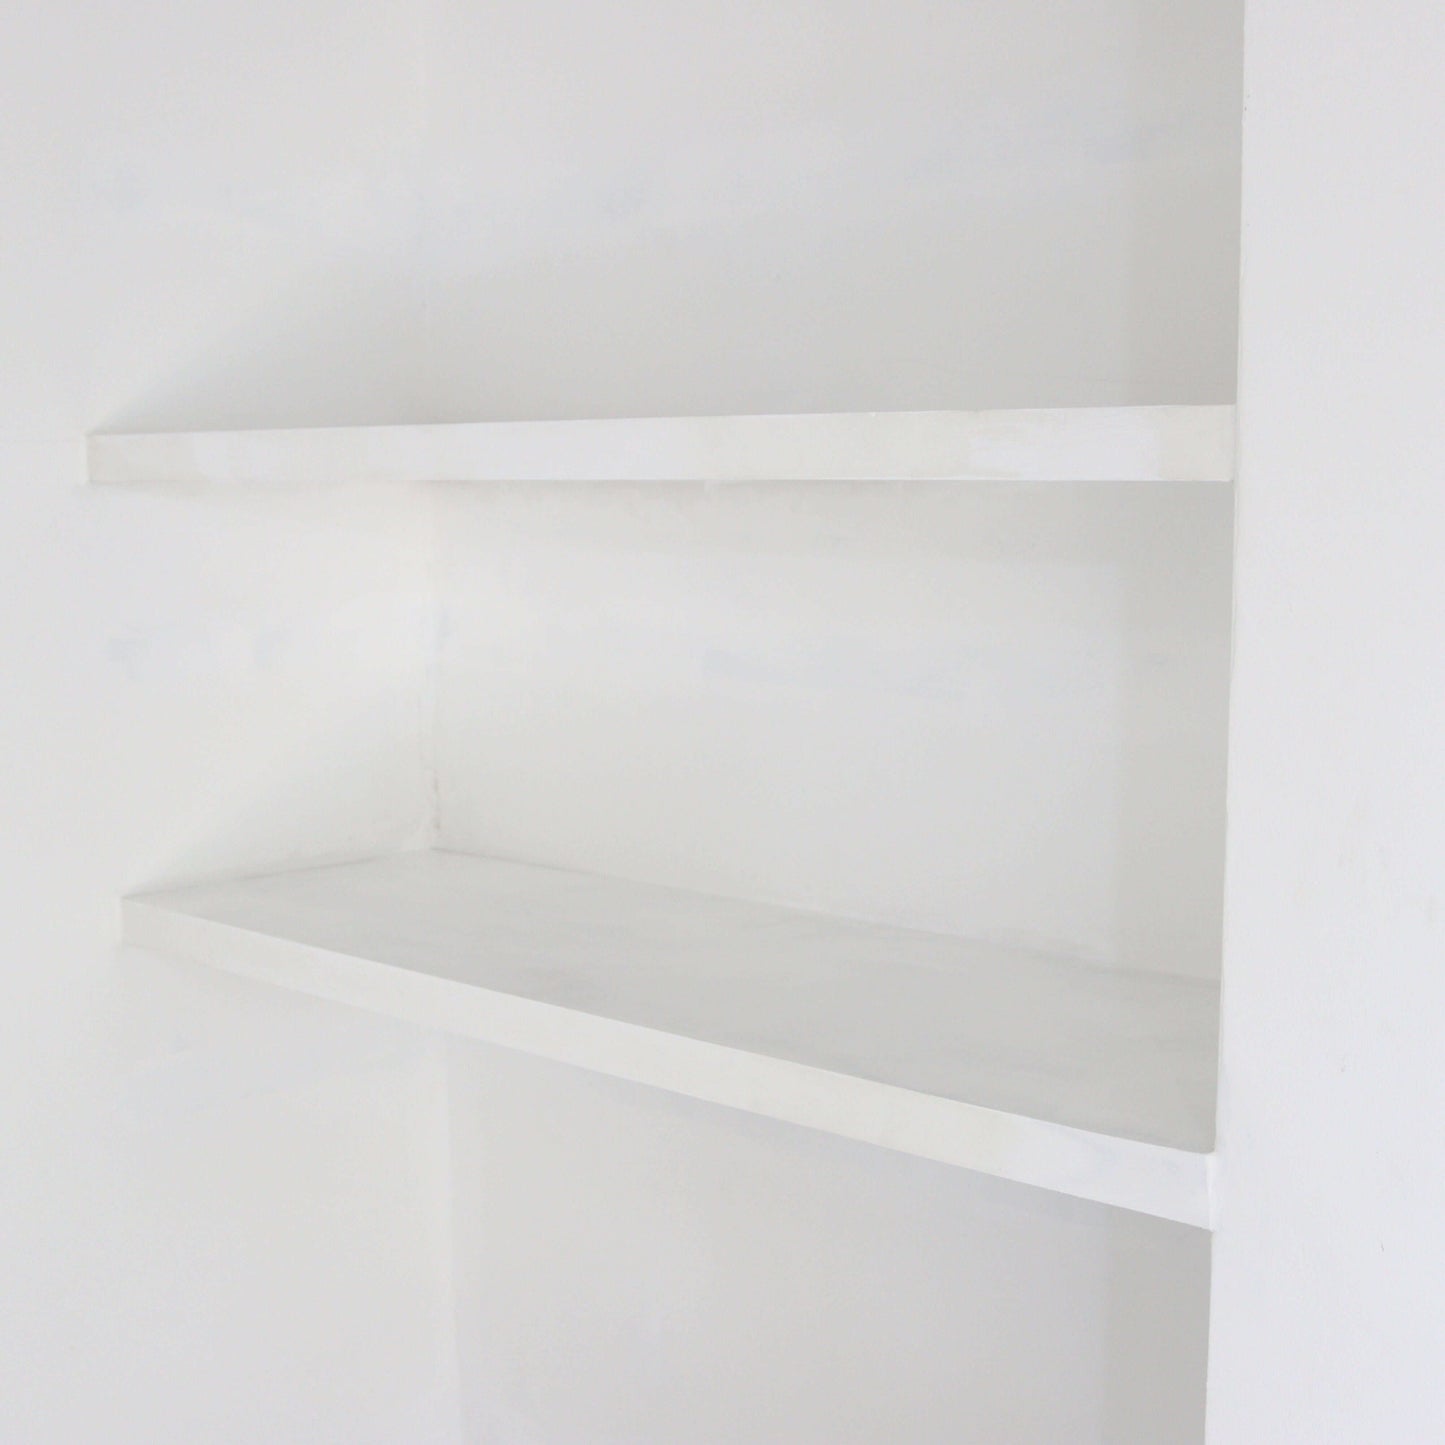 Paintable Alcove Floating Shelves - 59 cm by 15 cm